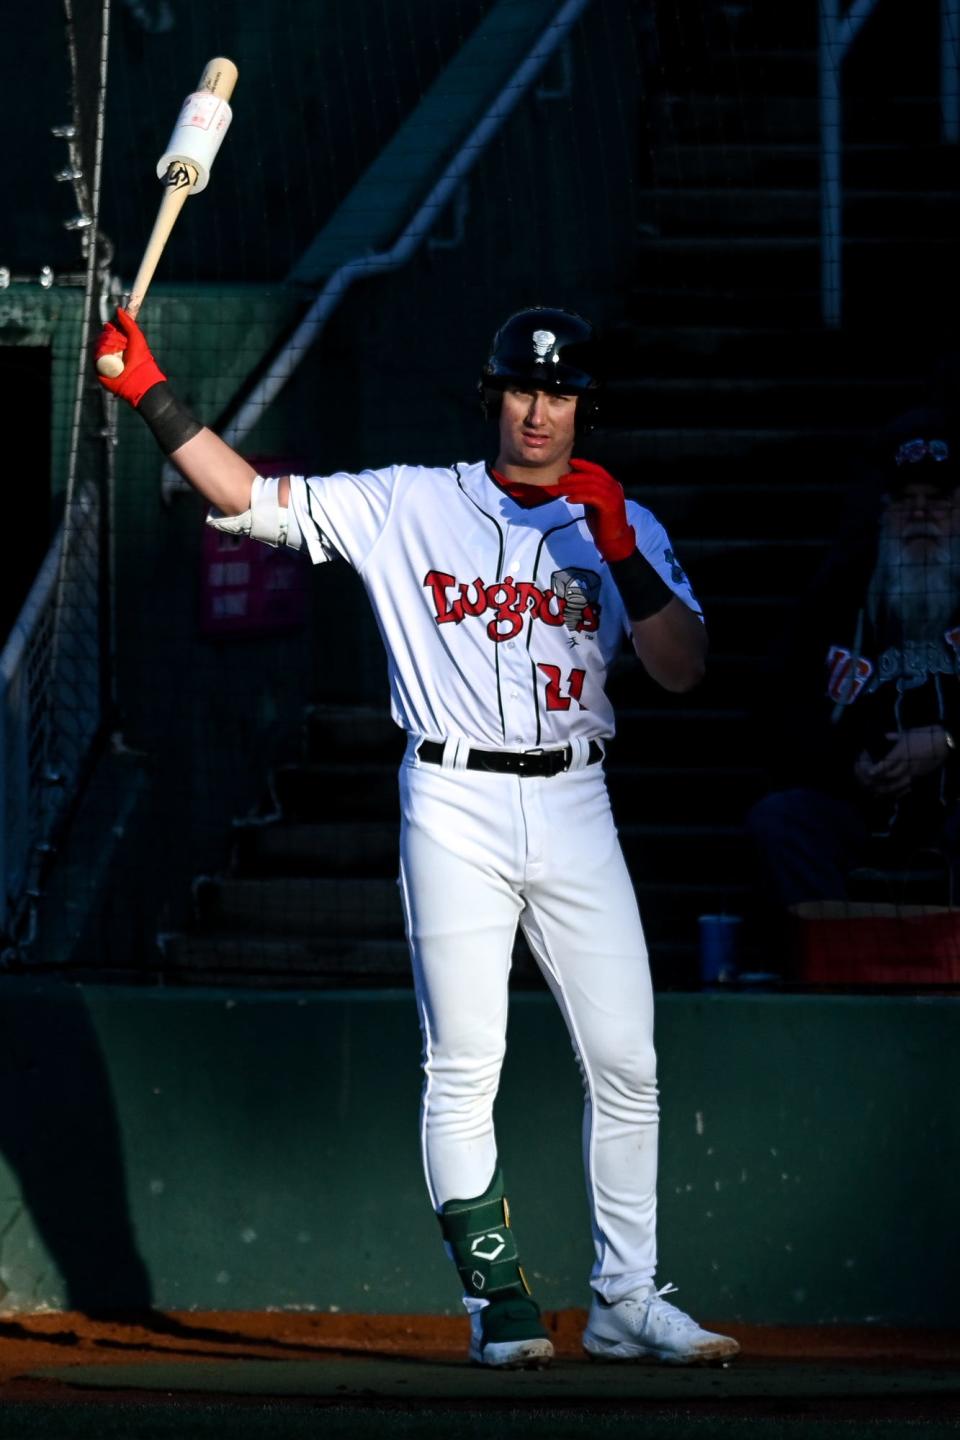 Lugnuts catcher Tyler Soderstrom warms up before batting in the first inning on Wednesday, April 6, 2022, during the Crosstown Showdown against Michigan State at Jackson Field in Lansing. Diamond Baseball Holdings reached an agreement to purchase the Lugnuts last week.